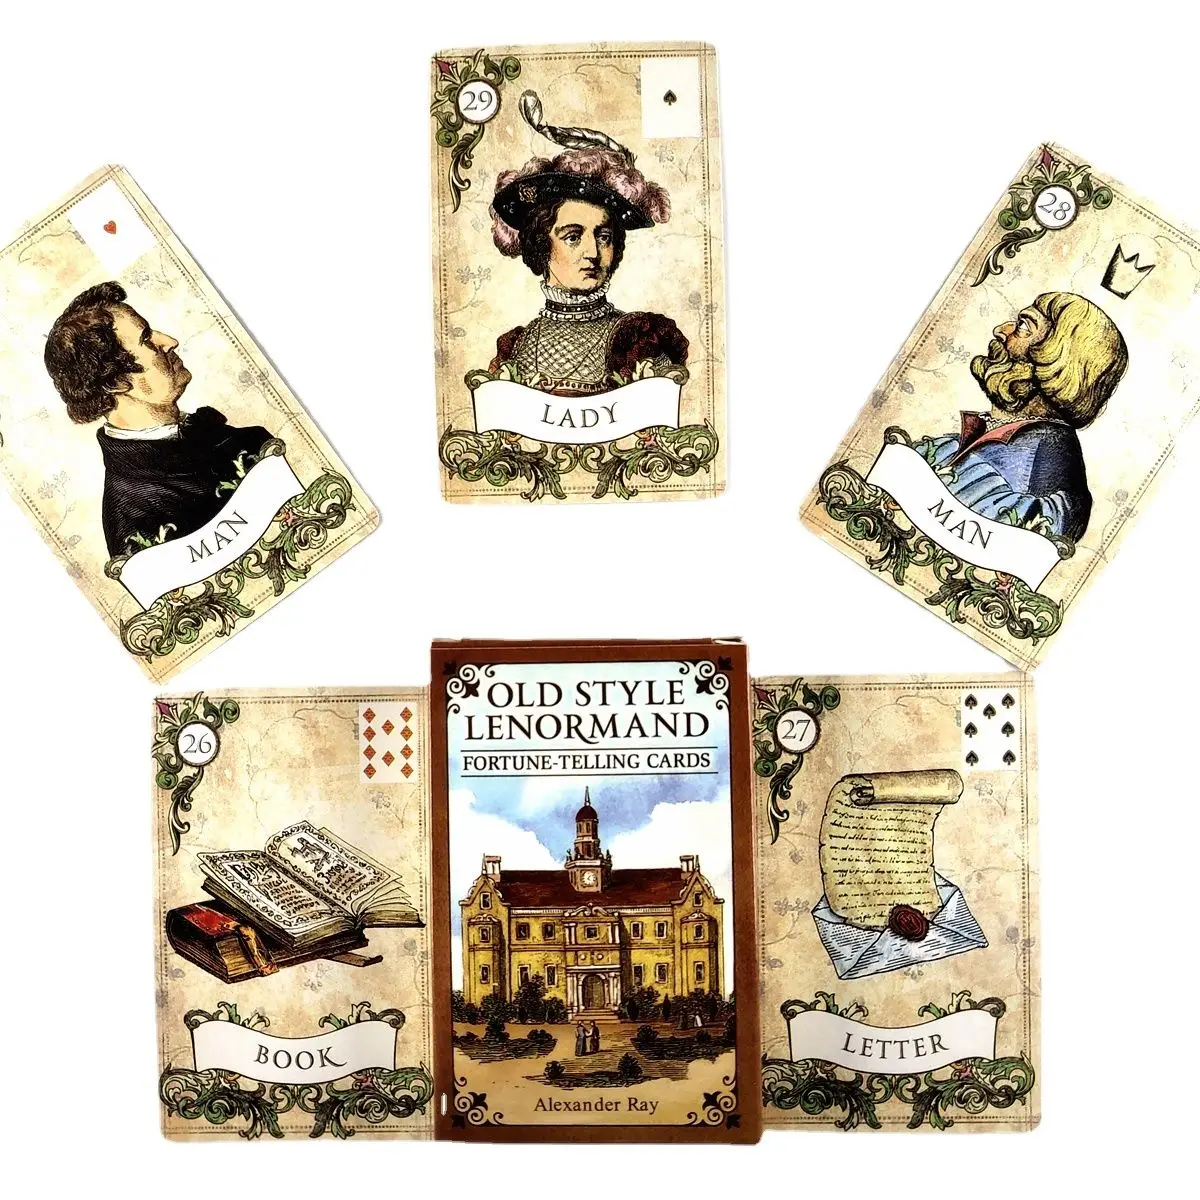 New Arrival High Quality Old Style Lenormand Fortune-Telling Tarot Cards Fortune Guidance Telling Divination Deck Board Game